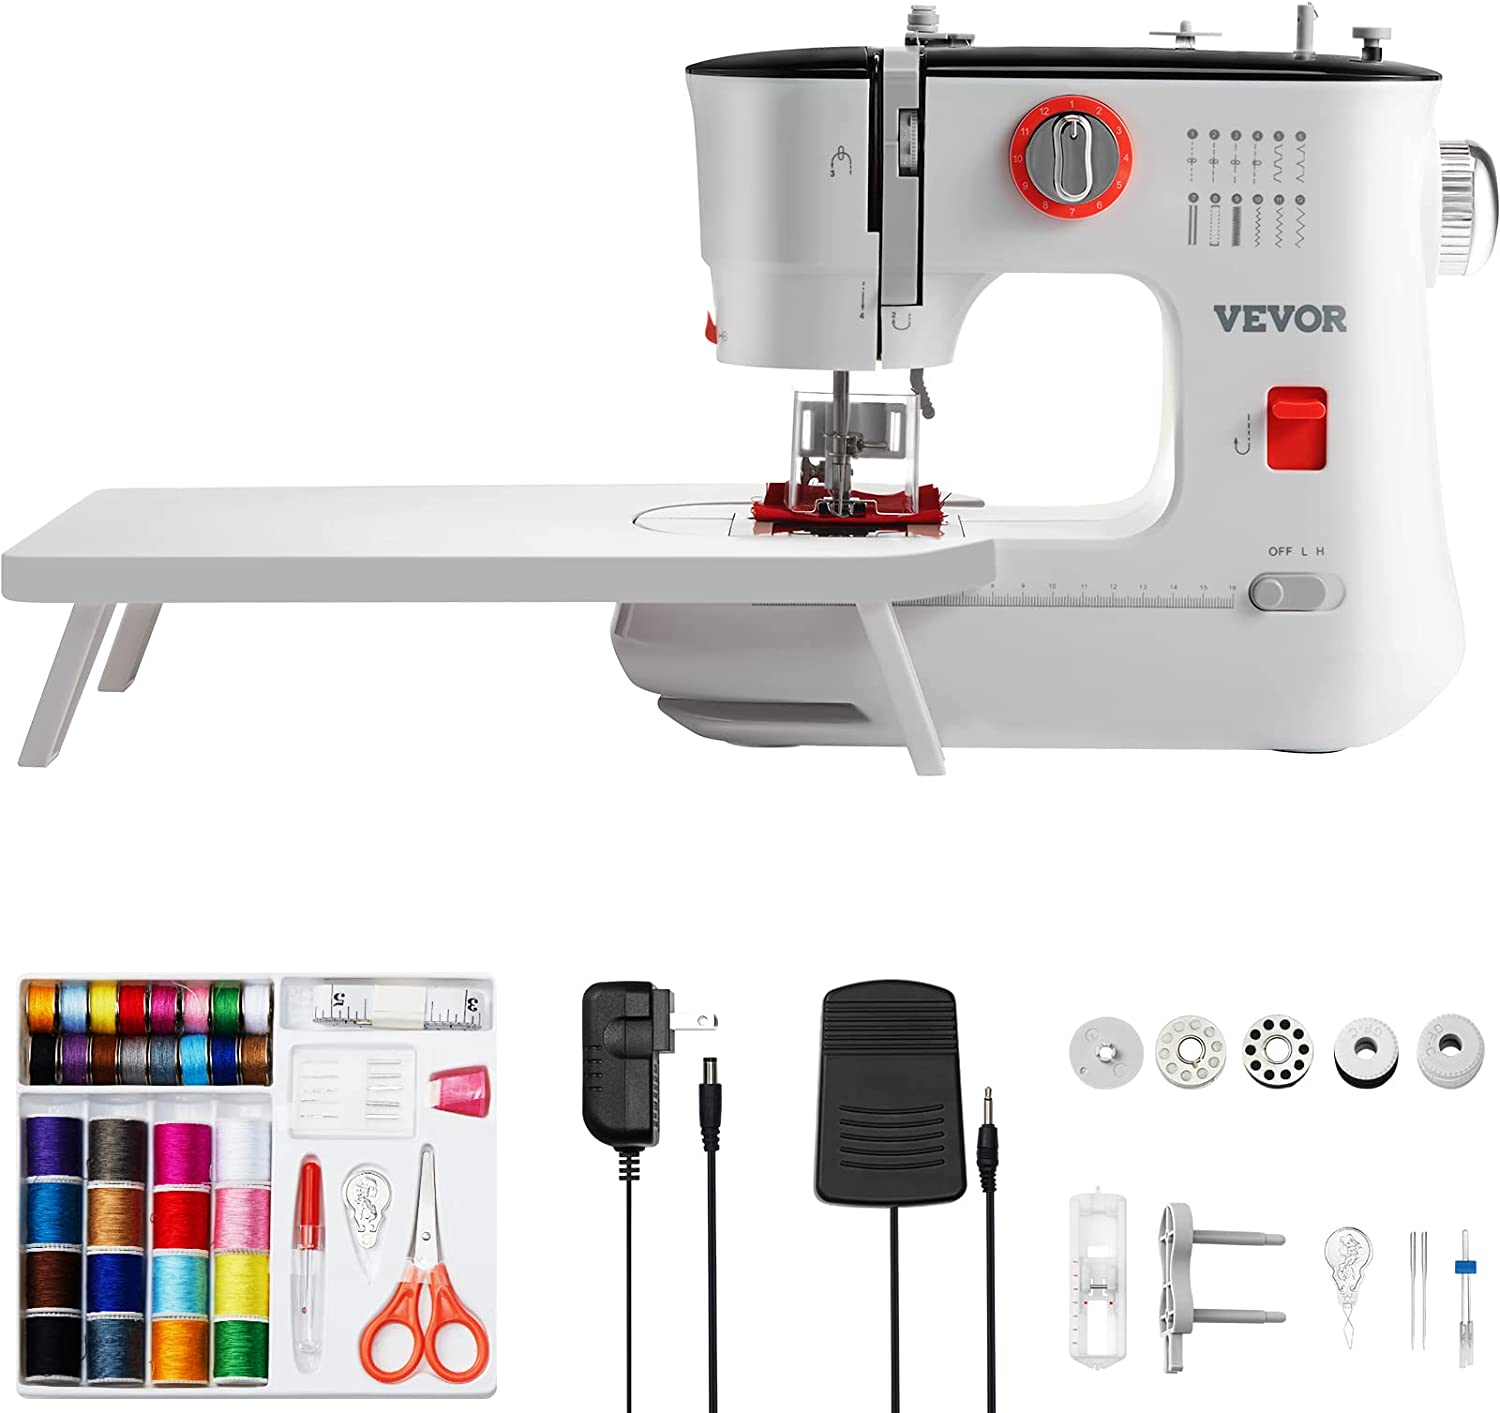 VEVOR Sewing Machine, Portable Sewing Machine for Beginners with 12 Built-in Stitches & Reverse Sewing